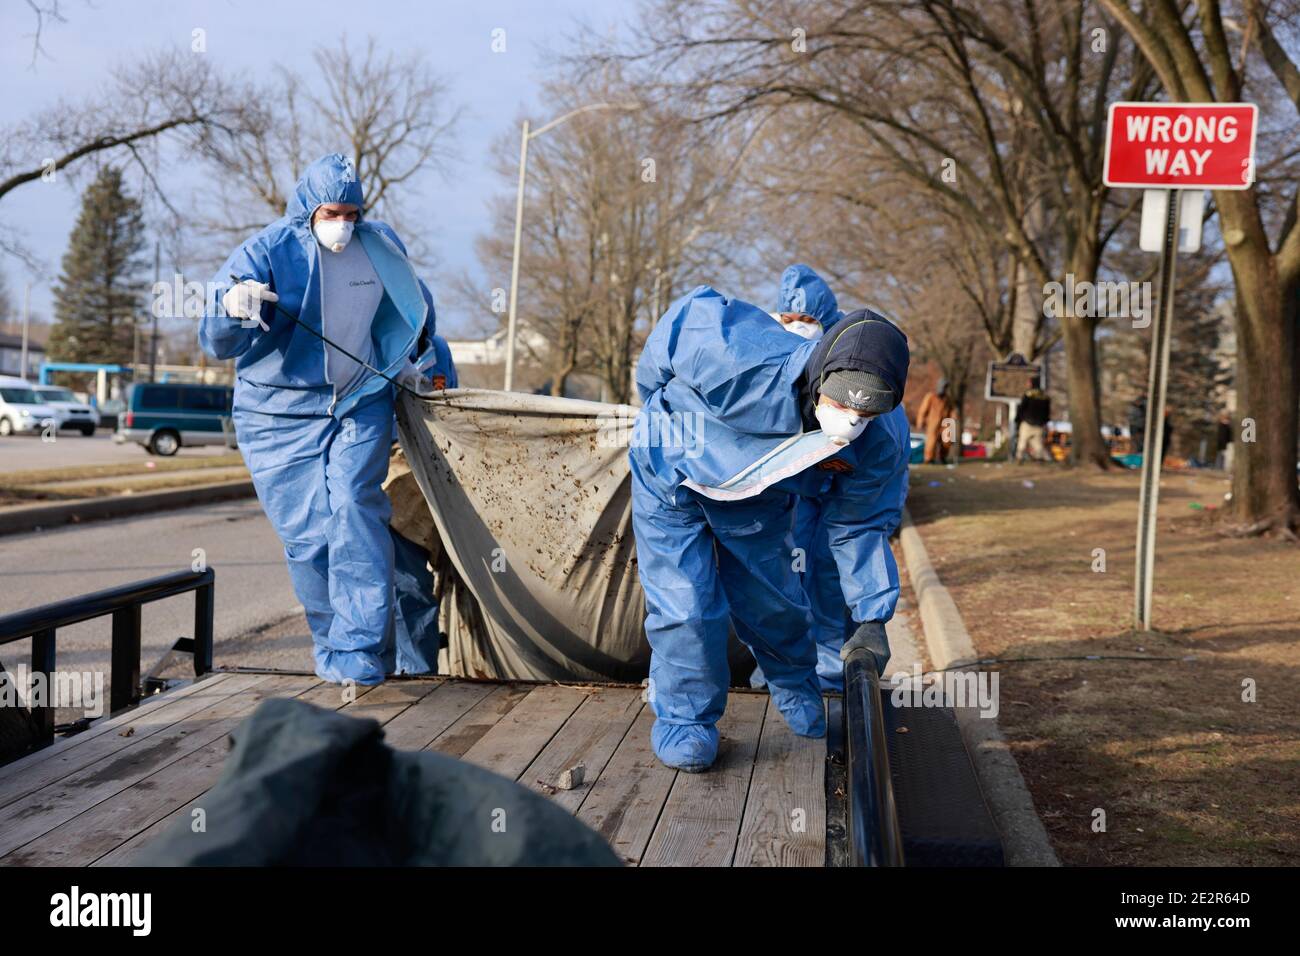 A work crew dressed in PPE (Personal protective equipment) removes items belonging to community members experiencing homelessness from along S. College Avenue. The City of Bloomington evicts members of the community who are experiencing homelessness from the right-of-way along S. College, which was not subject to Parks and Recreation rules that tents could be pitched until 11 p.m. Workers from Centerstone arrived around 1:30 p.m., then police, and workers from the city who were dressed in PPE arrived later. Stock Photo